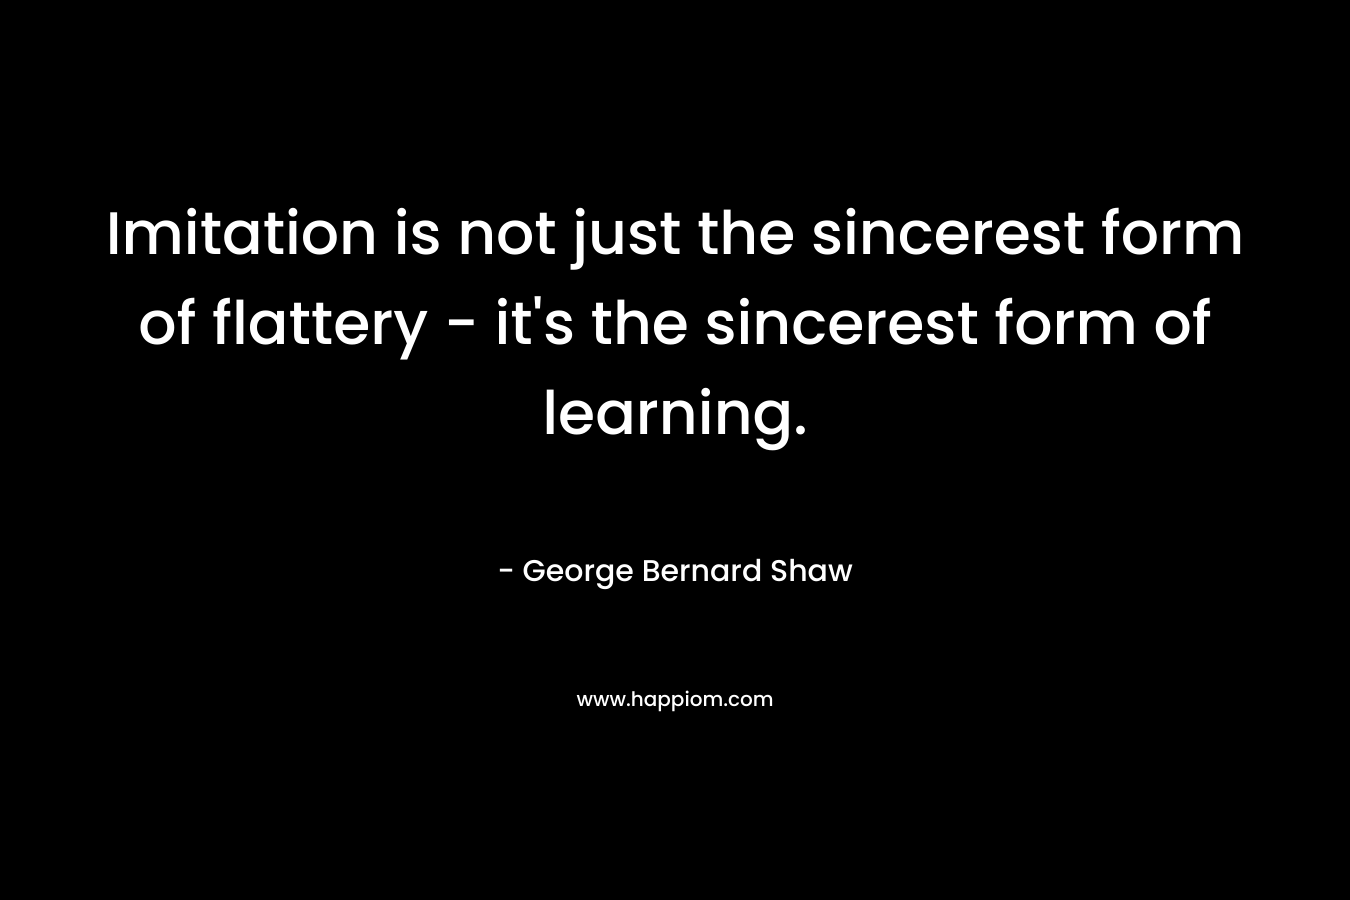 Imitation is not just the sincerest form of flattery - it's the sincerest form of learning.